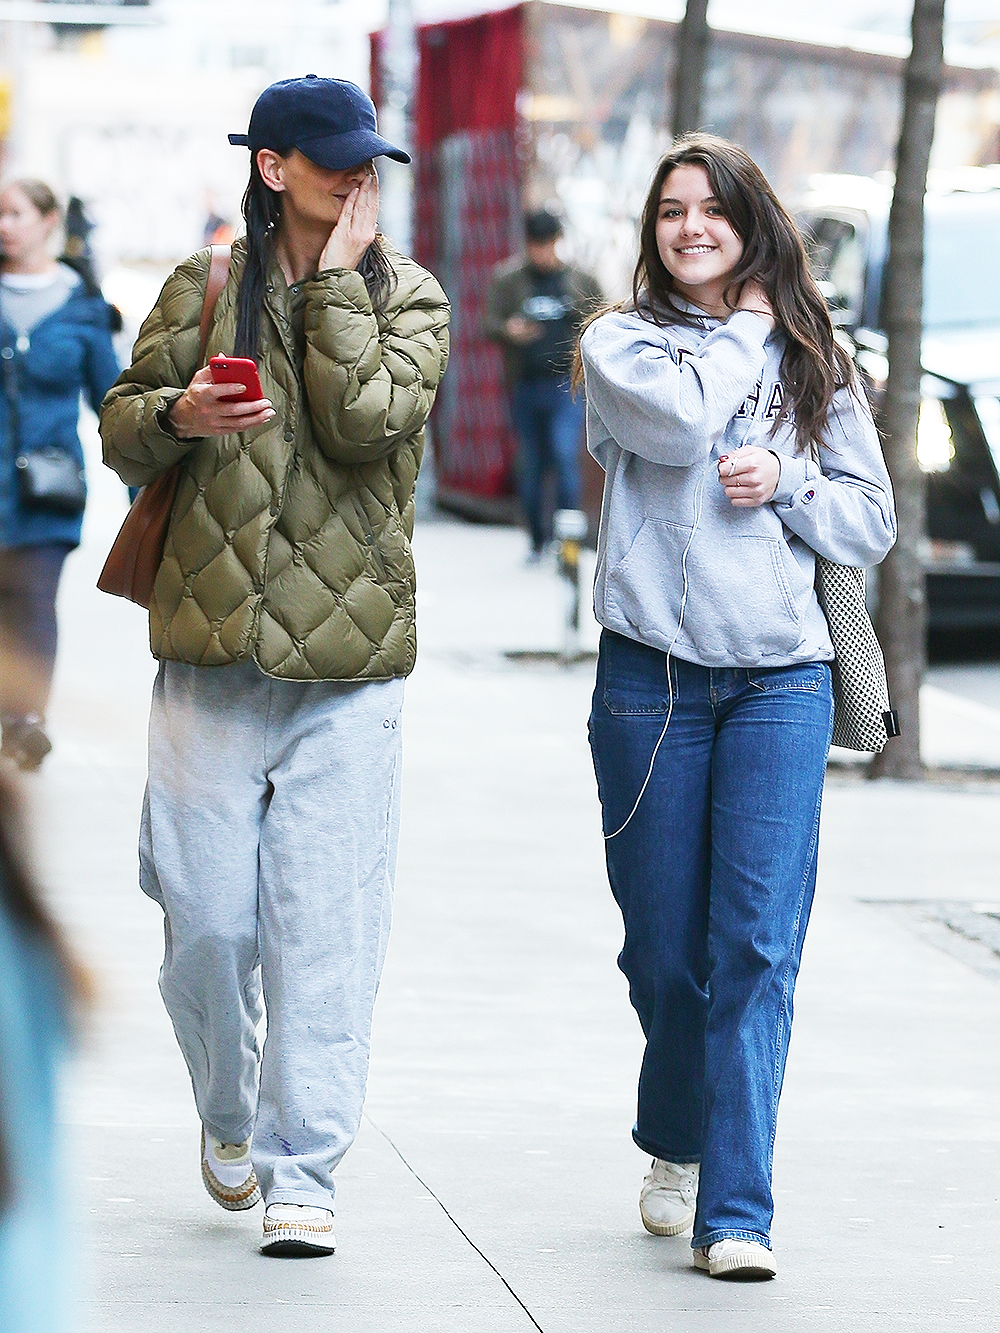 Katie Holmes & Suri Cruise: Photos Of The Mother/Daughter Duo